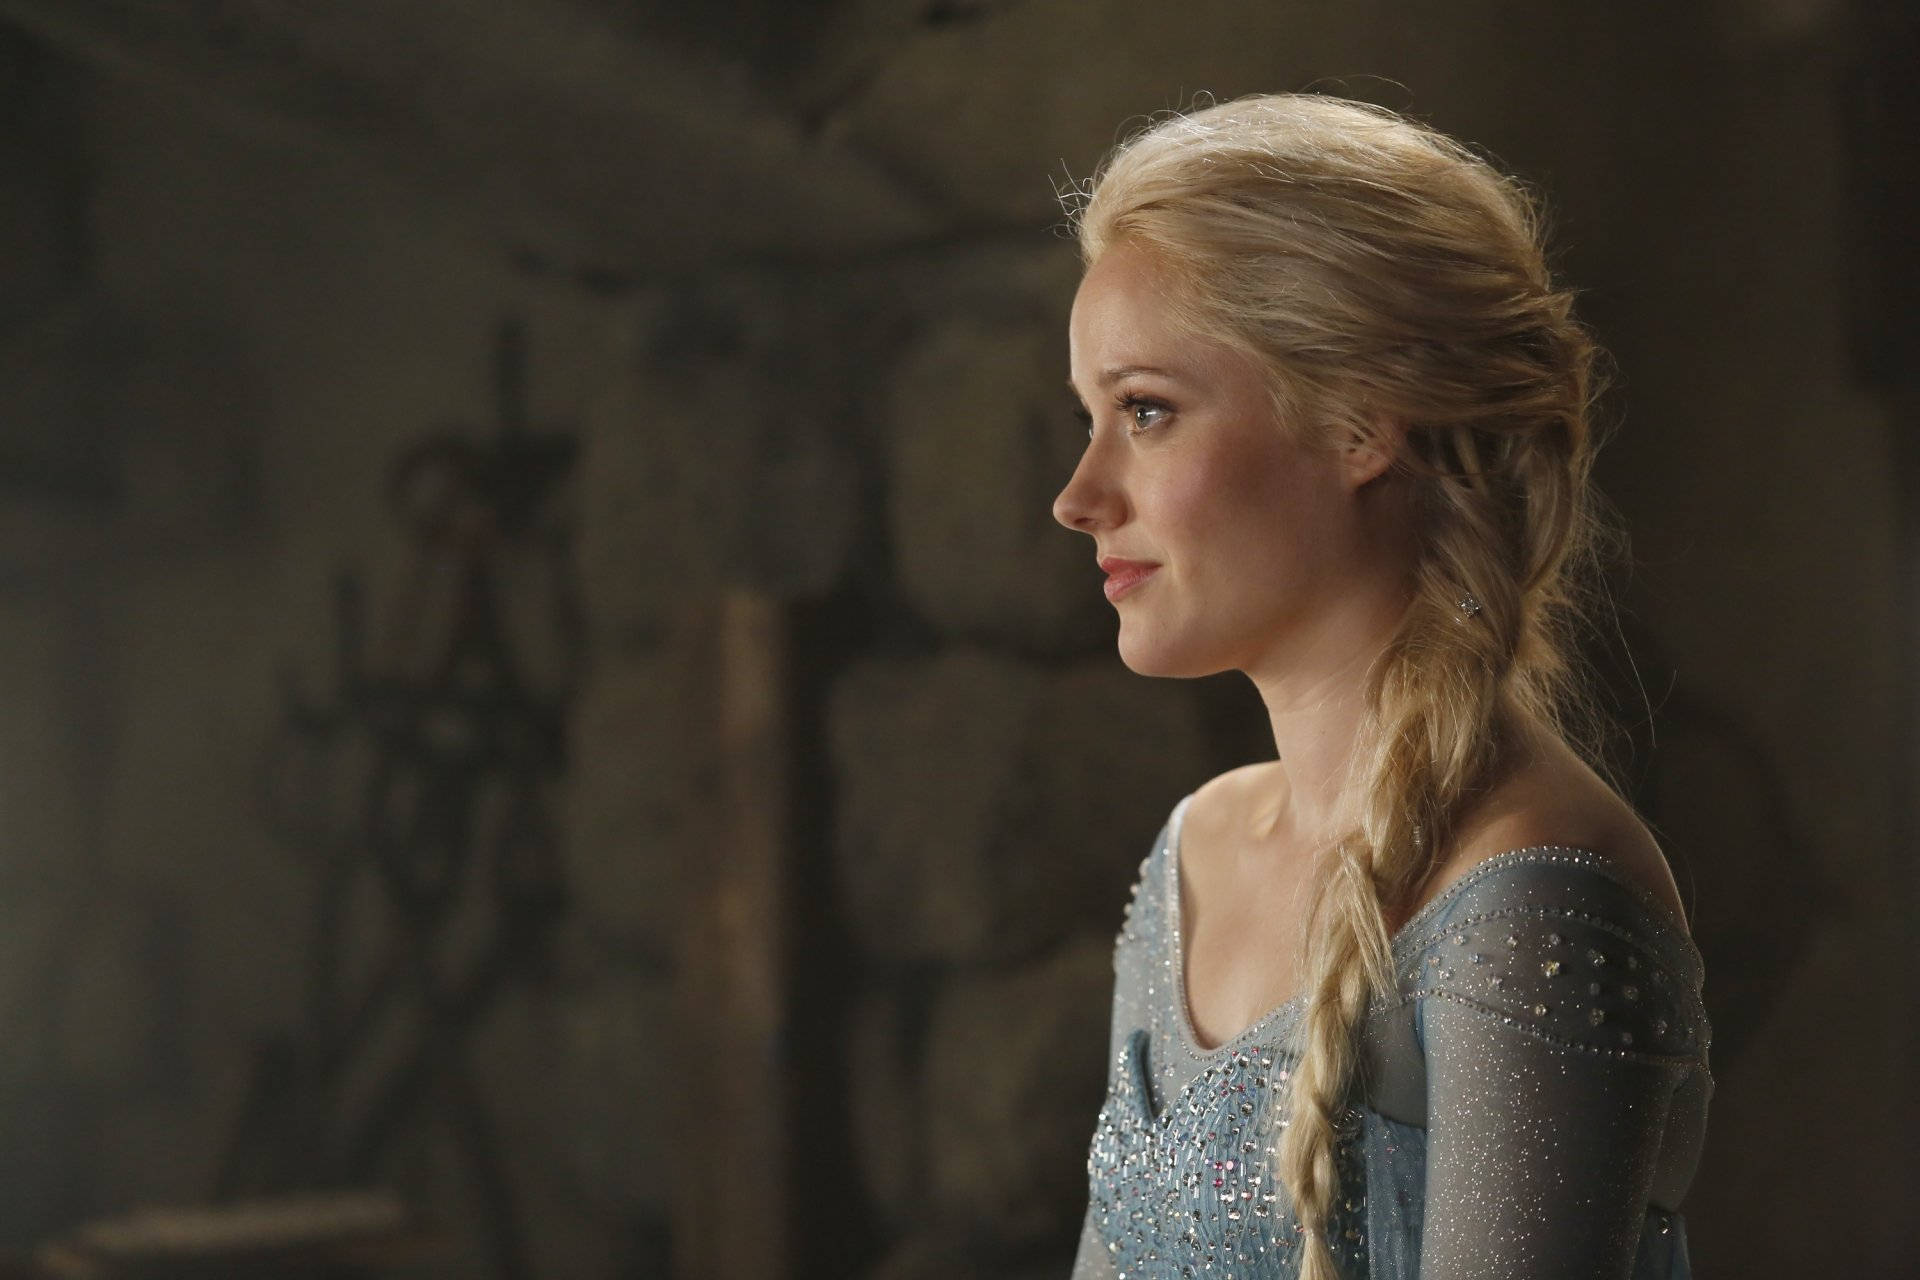 Georgina Haig embodying the character of Elsa in a stunning icy blue ensemble Wallpaper